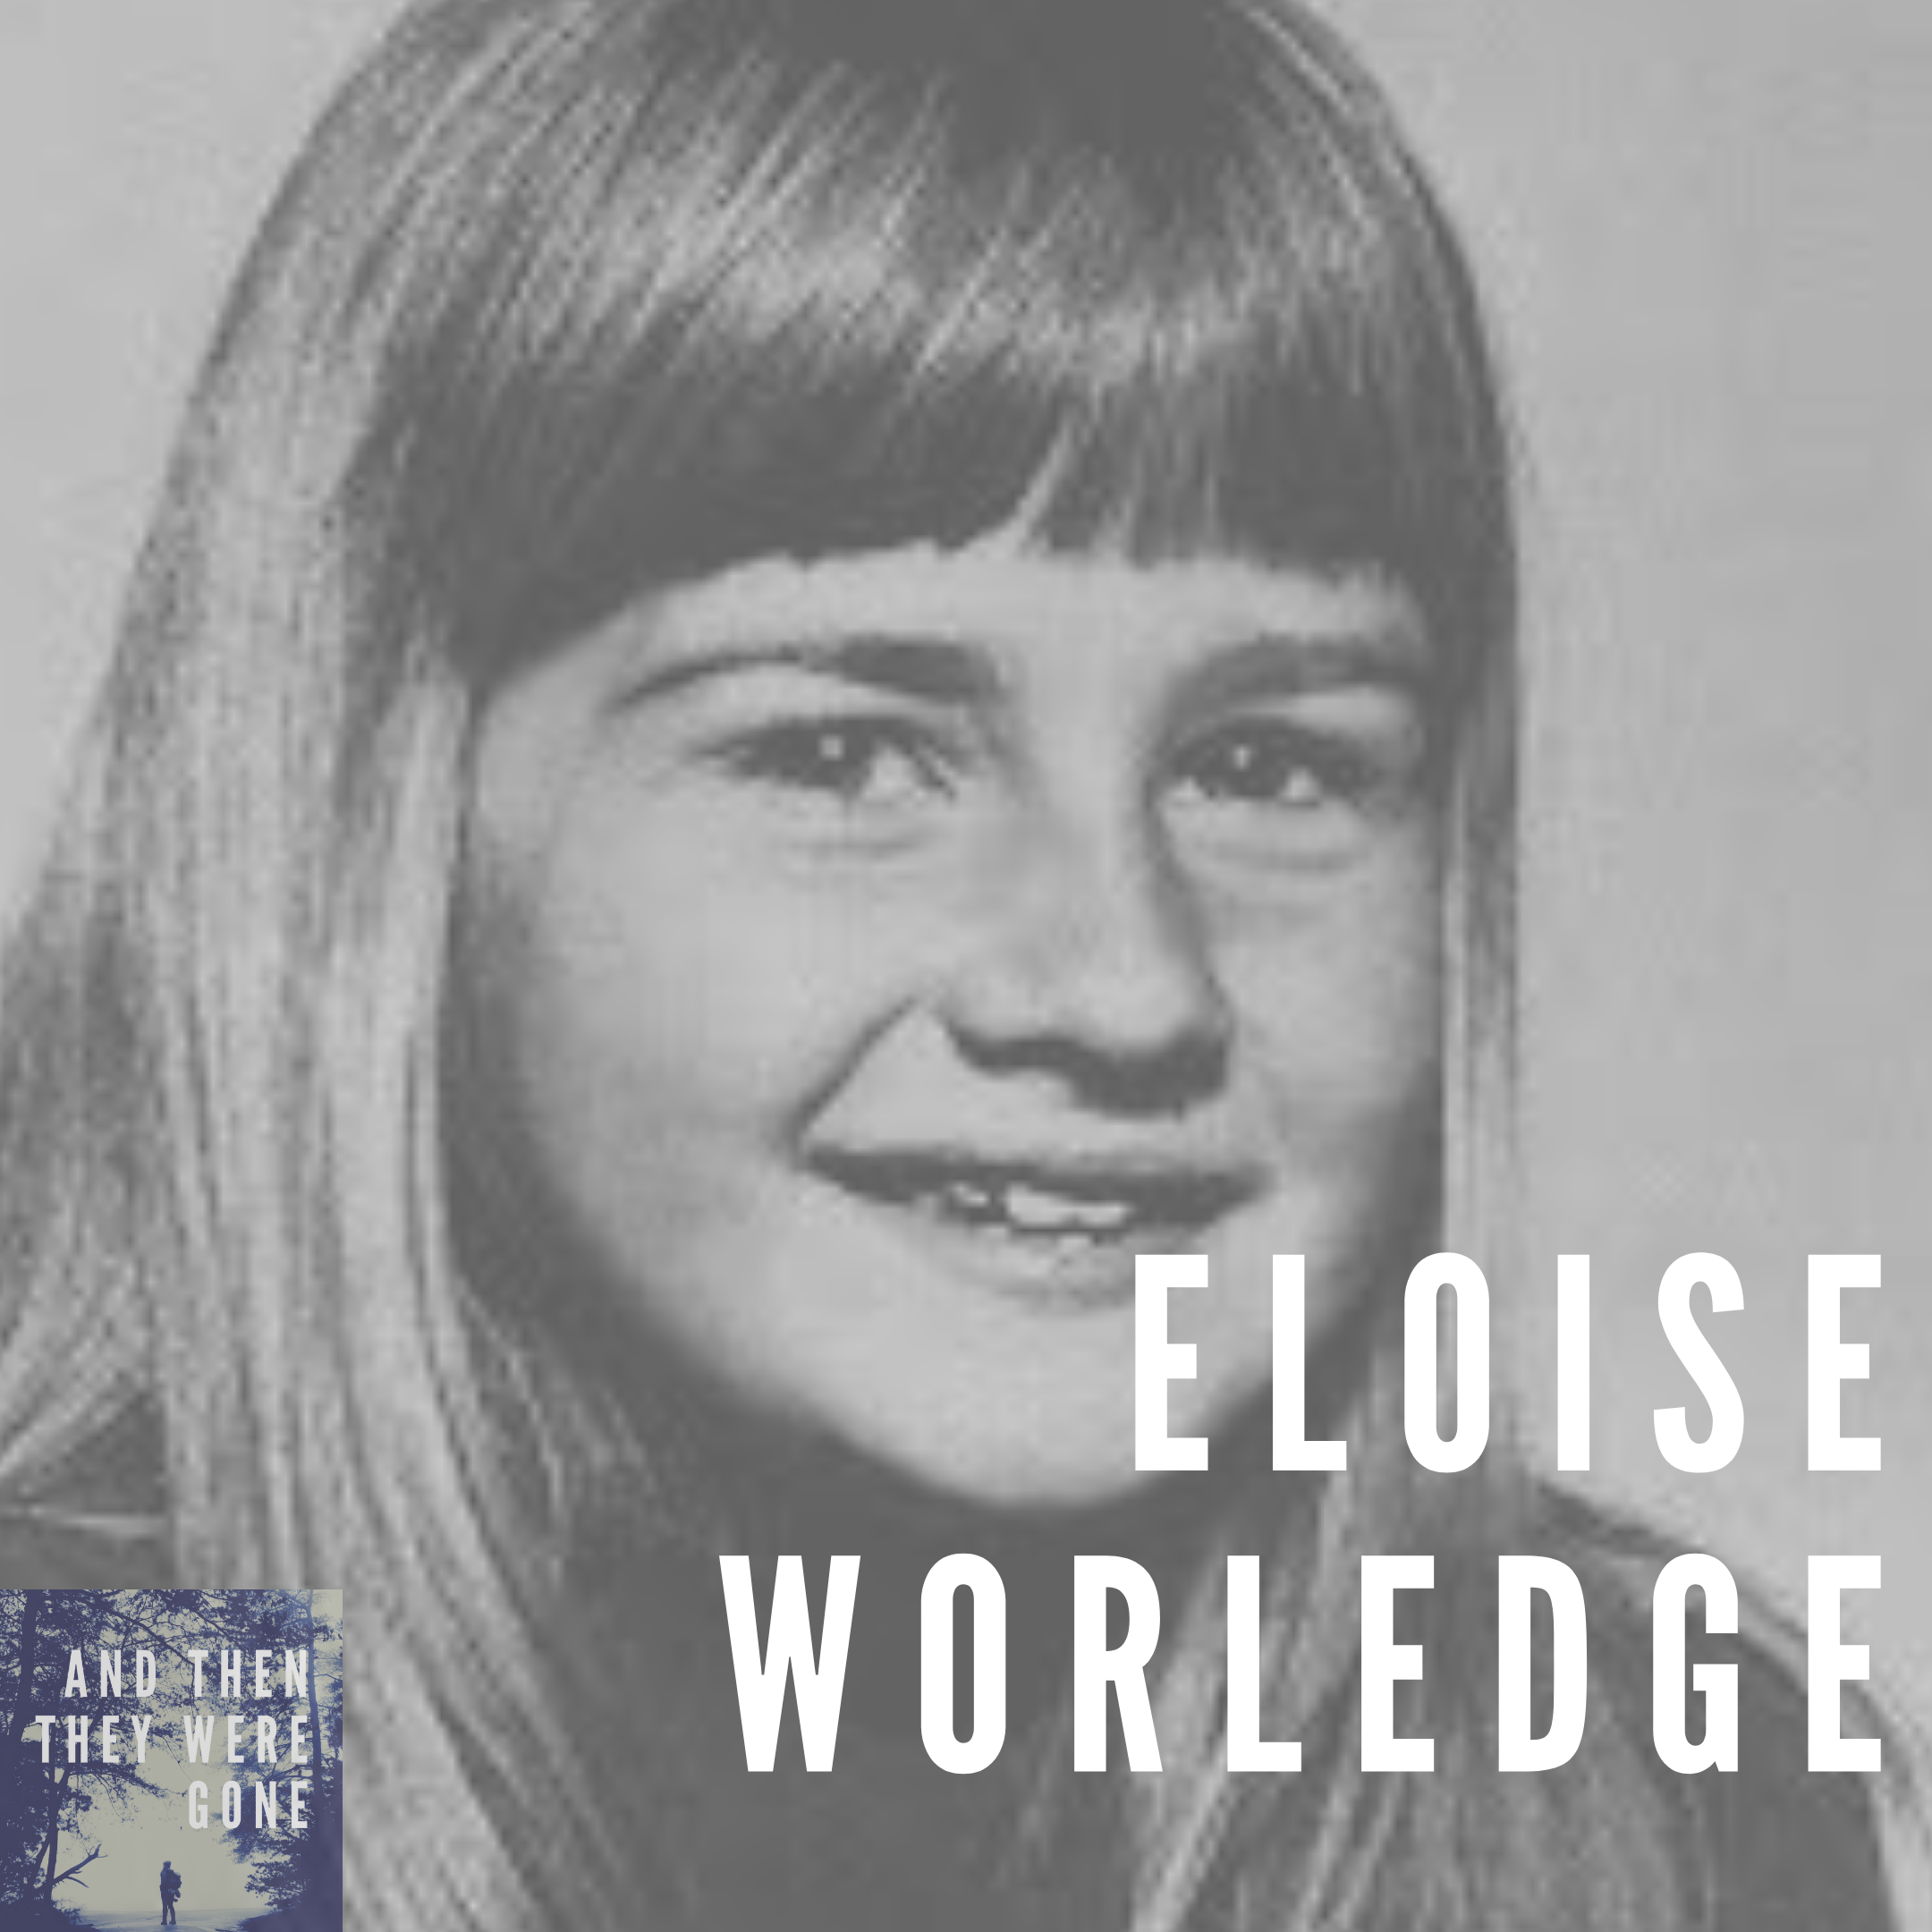 Eloise Worledge missing since January 12, 1976